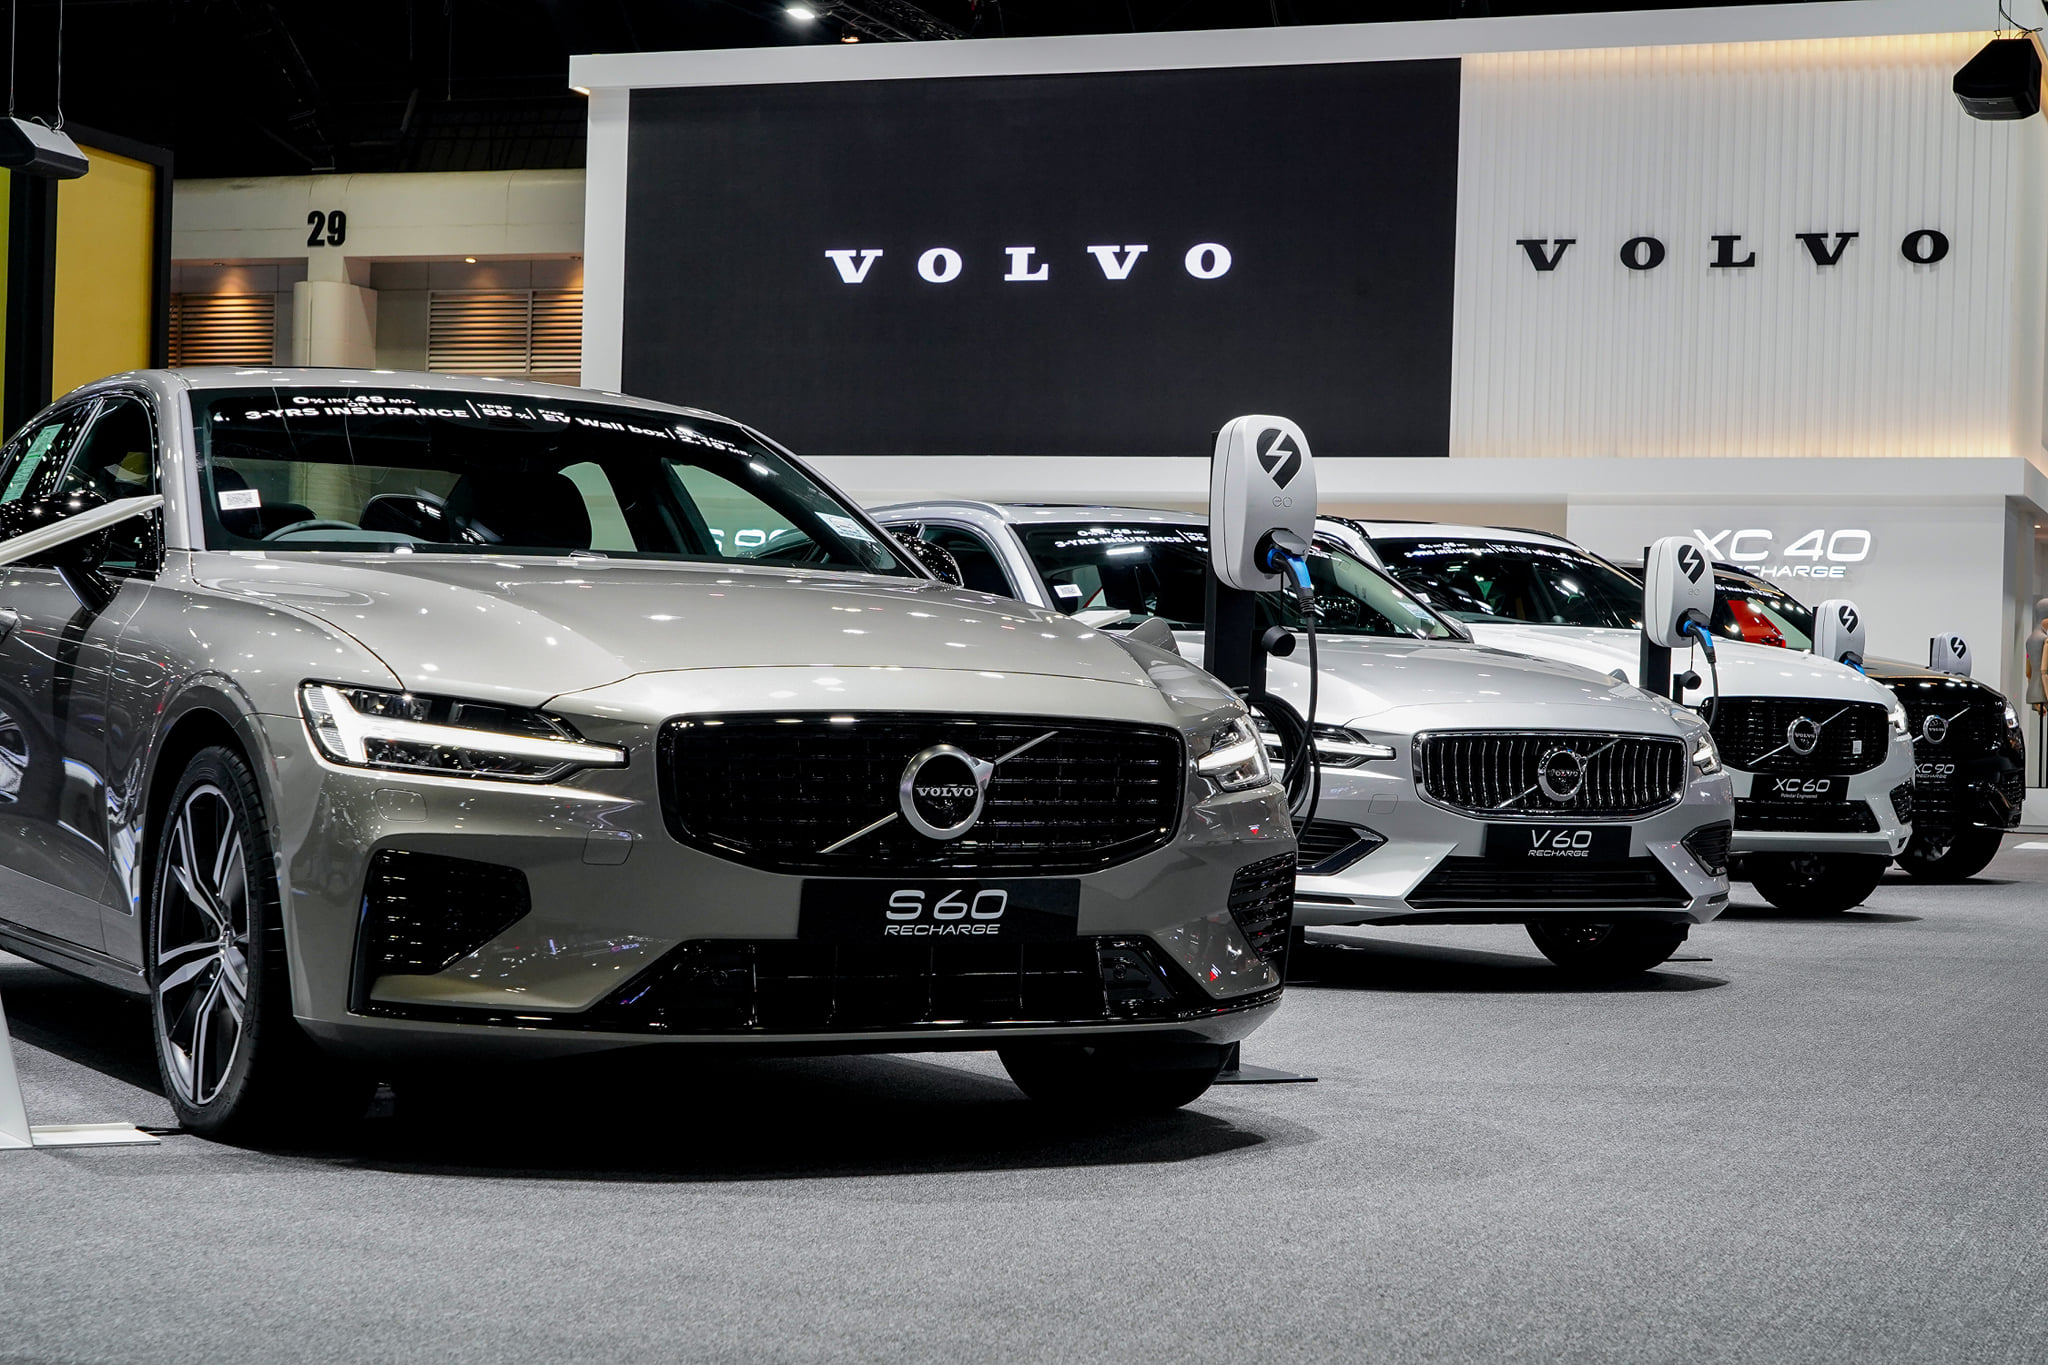 Volvo EV sales in Europe made up more than 3rd of company's car sales